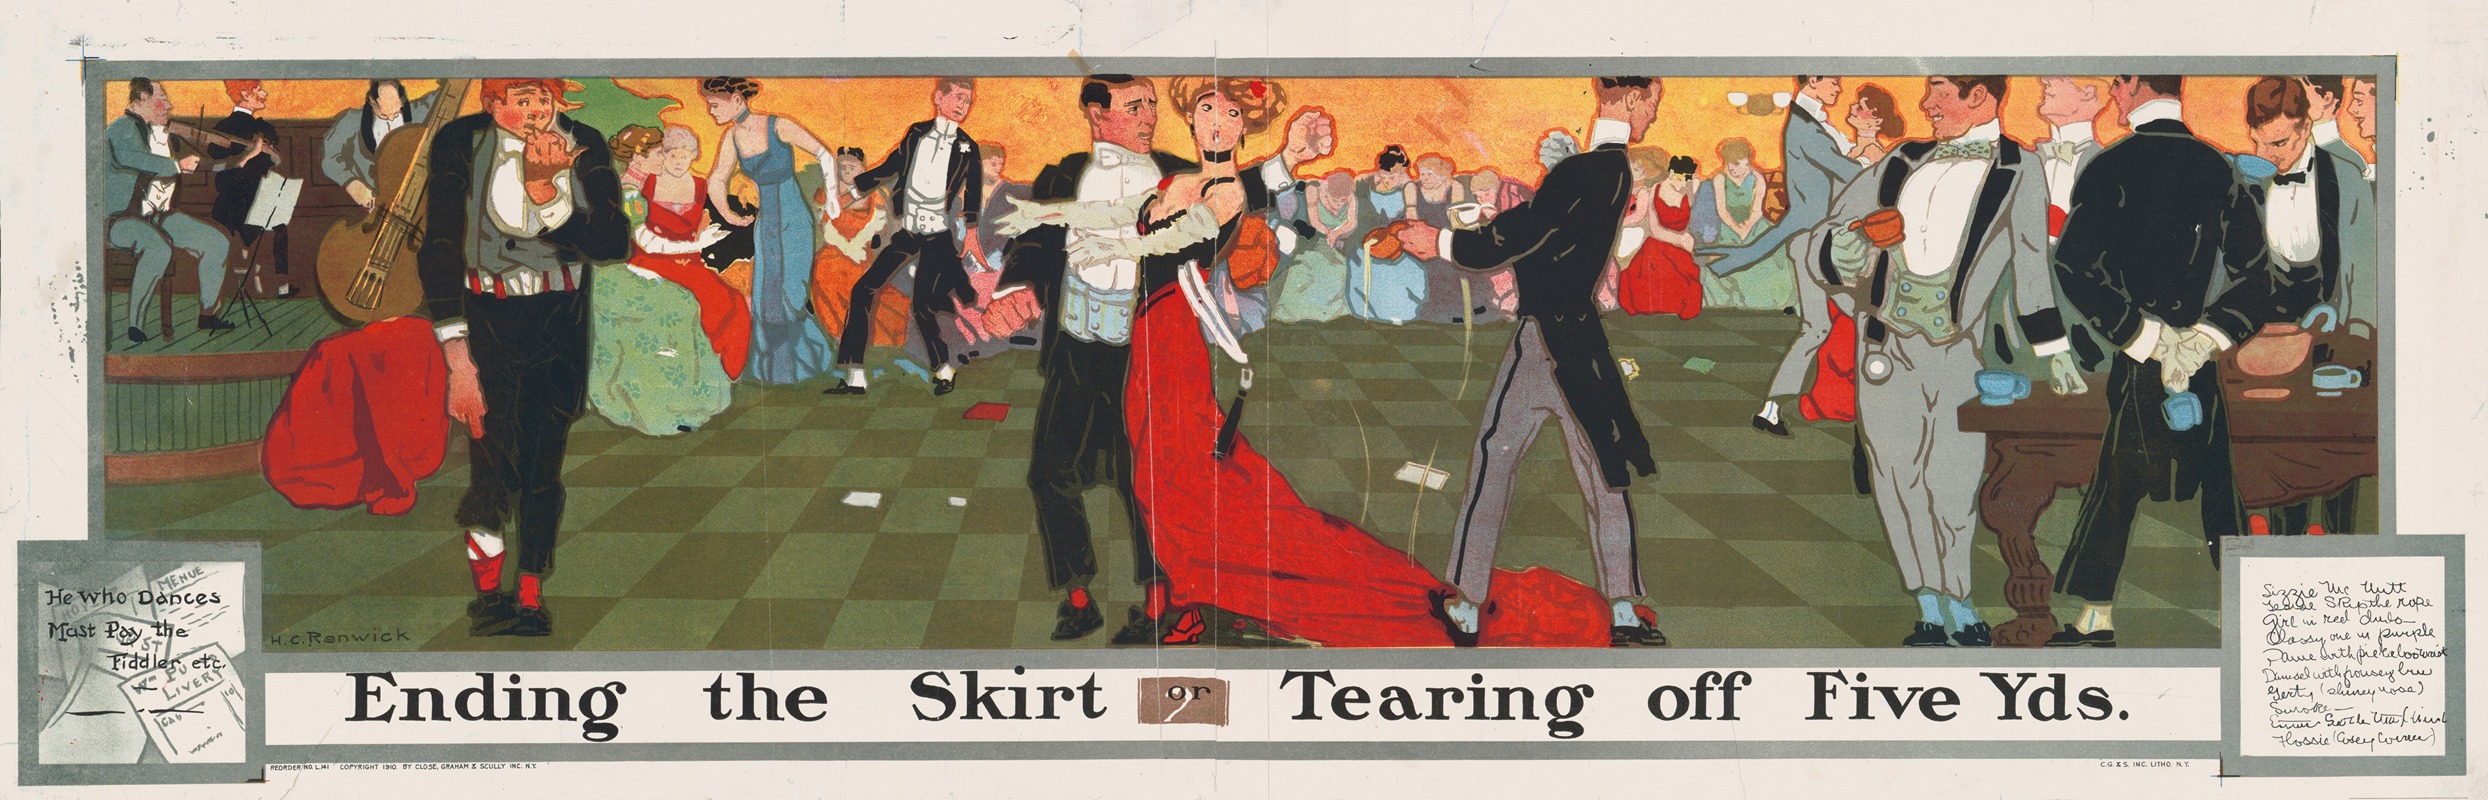 Howard Crosby Renwick - Ending the skirt or tearing off five yds, he who dances must pay the fiddler etc.